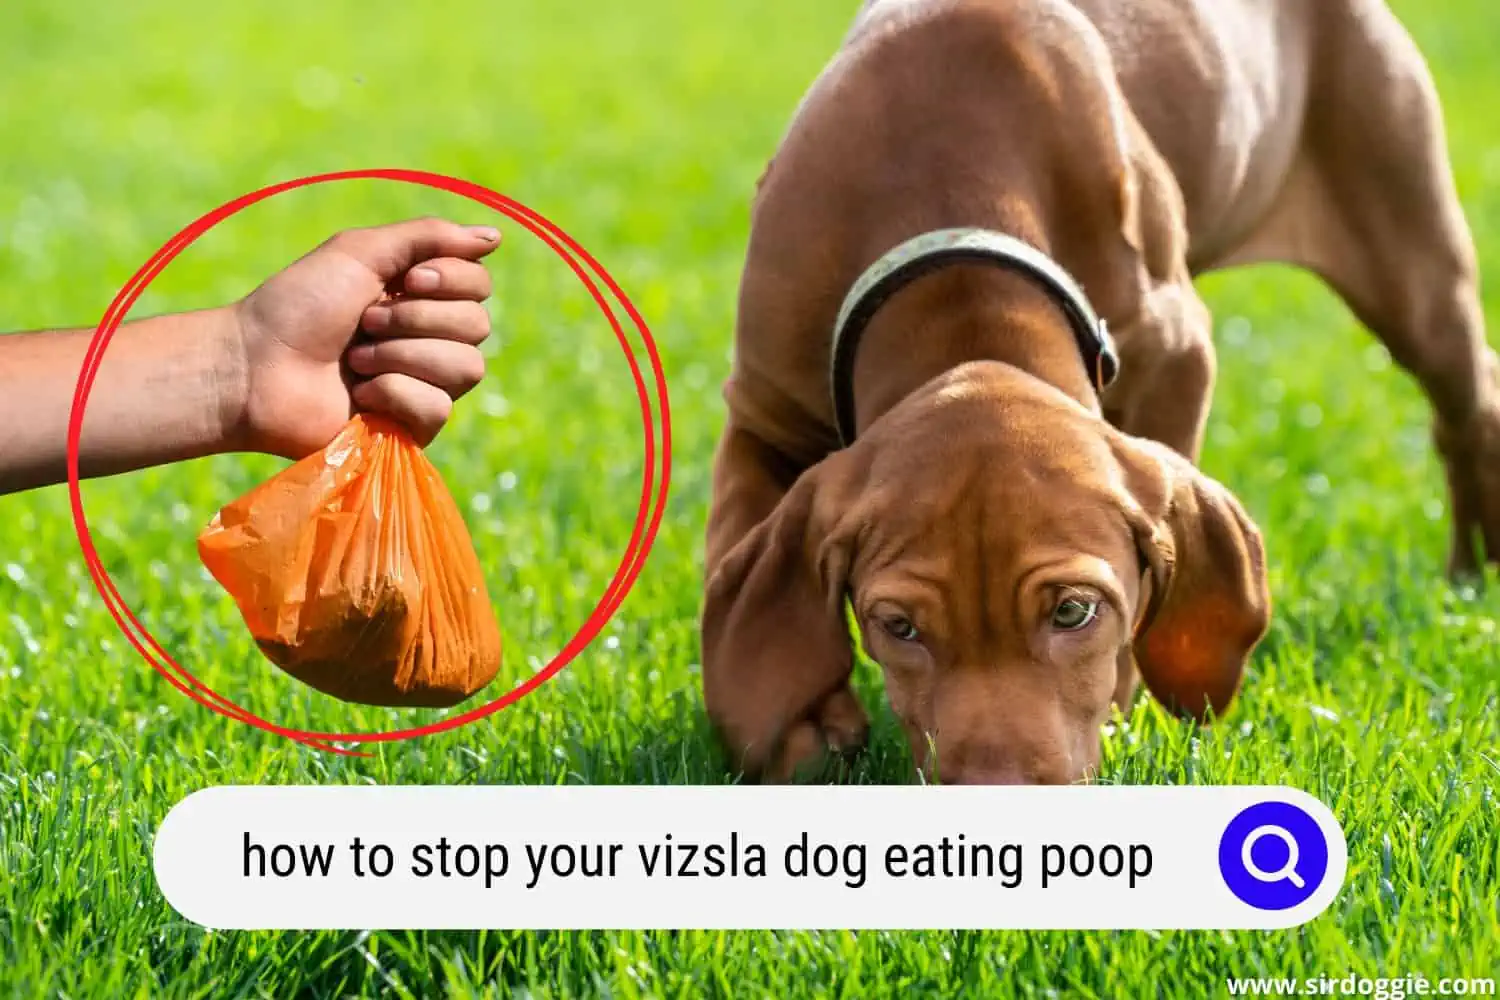 how to stop your vizsla dog eating poop